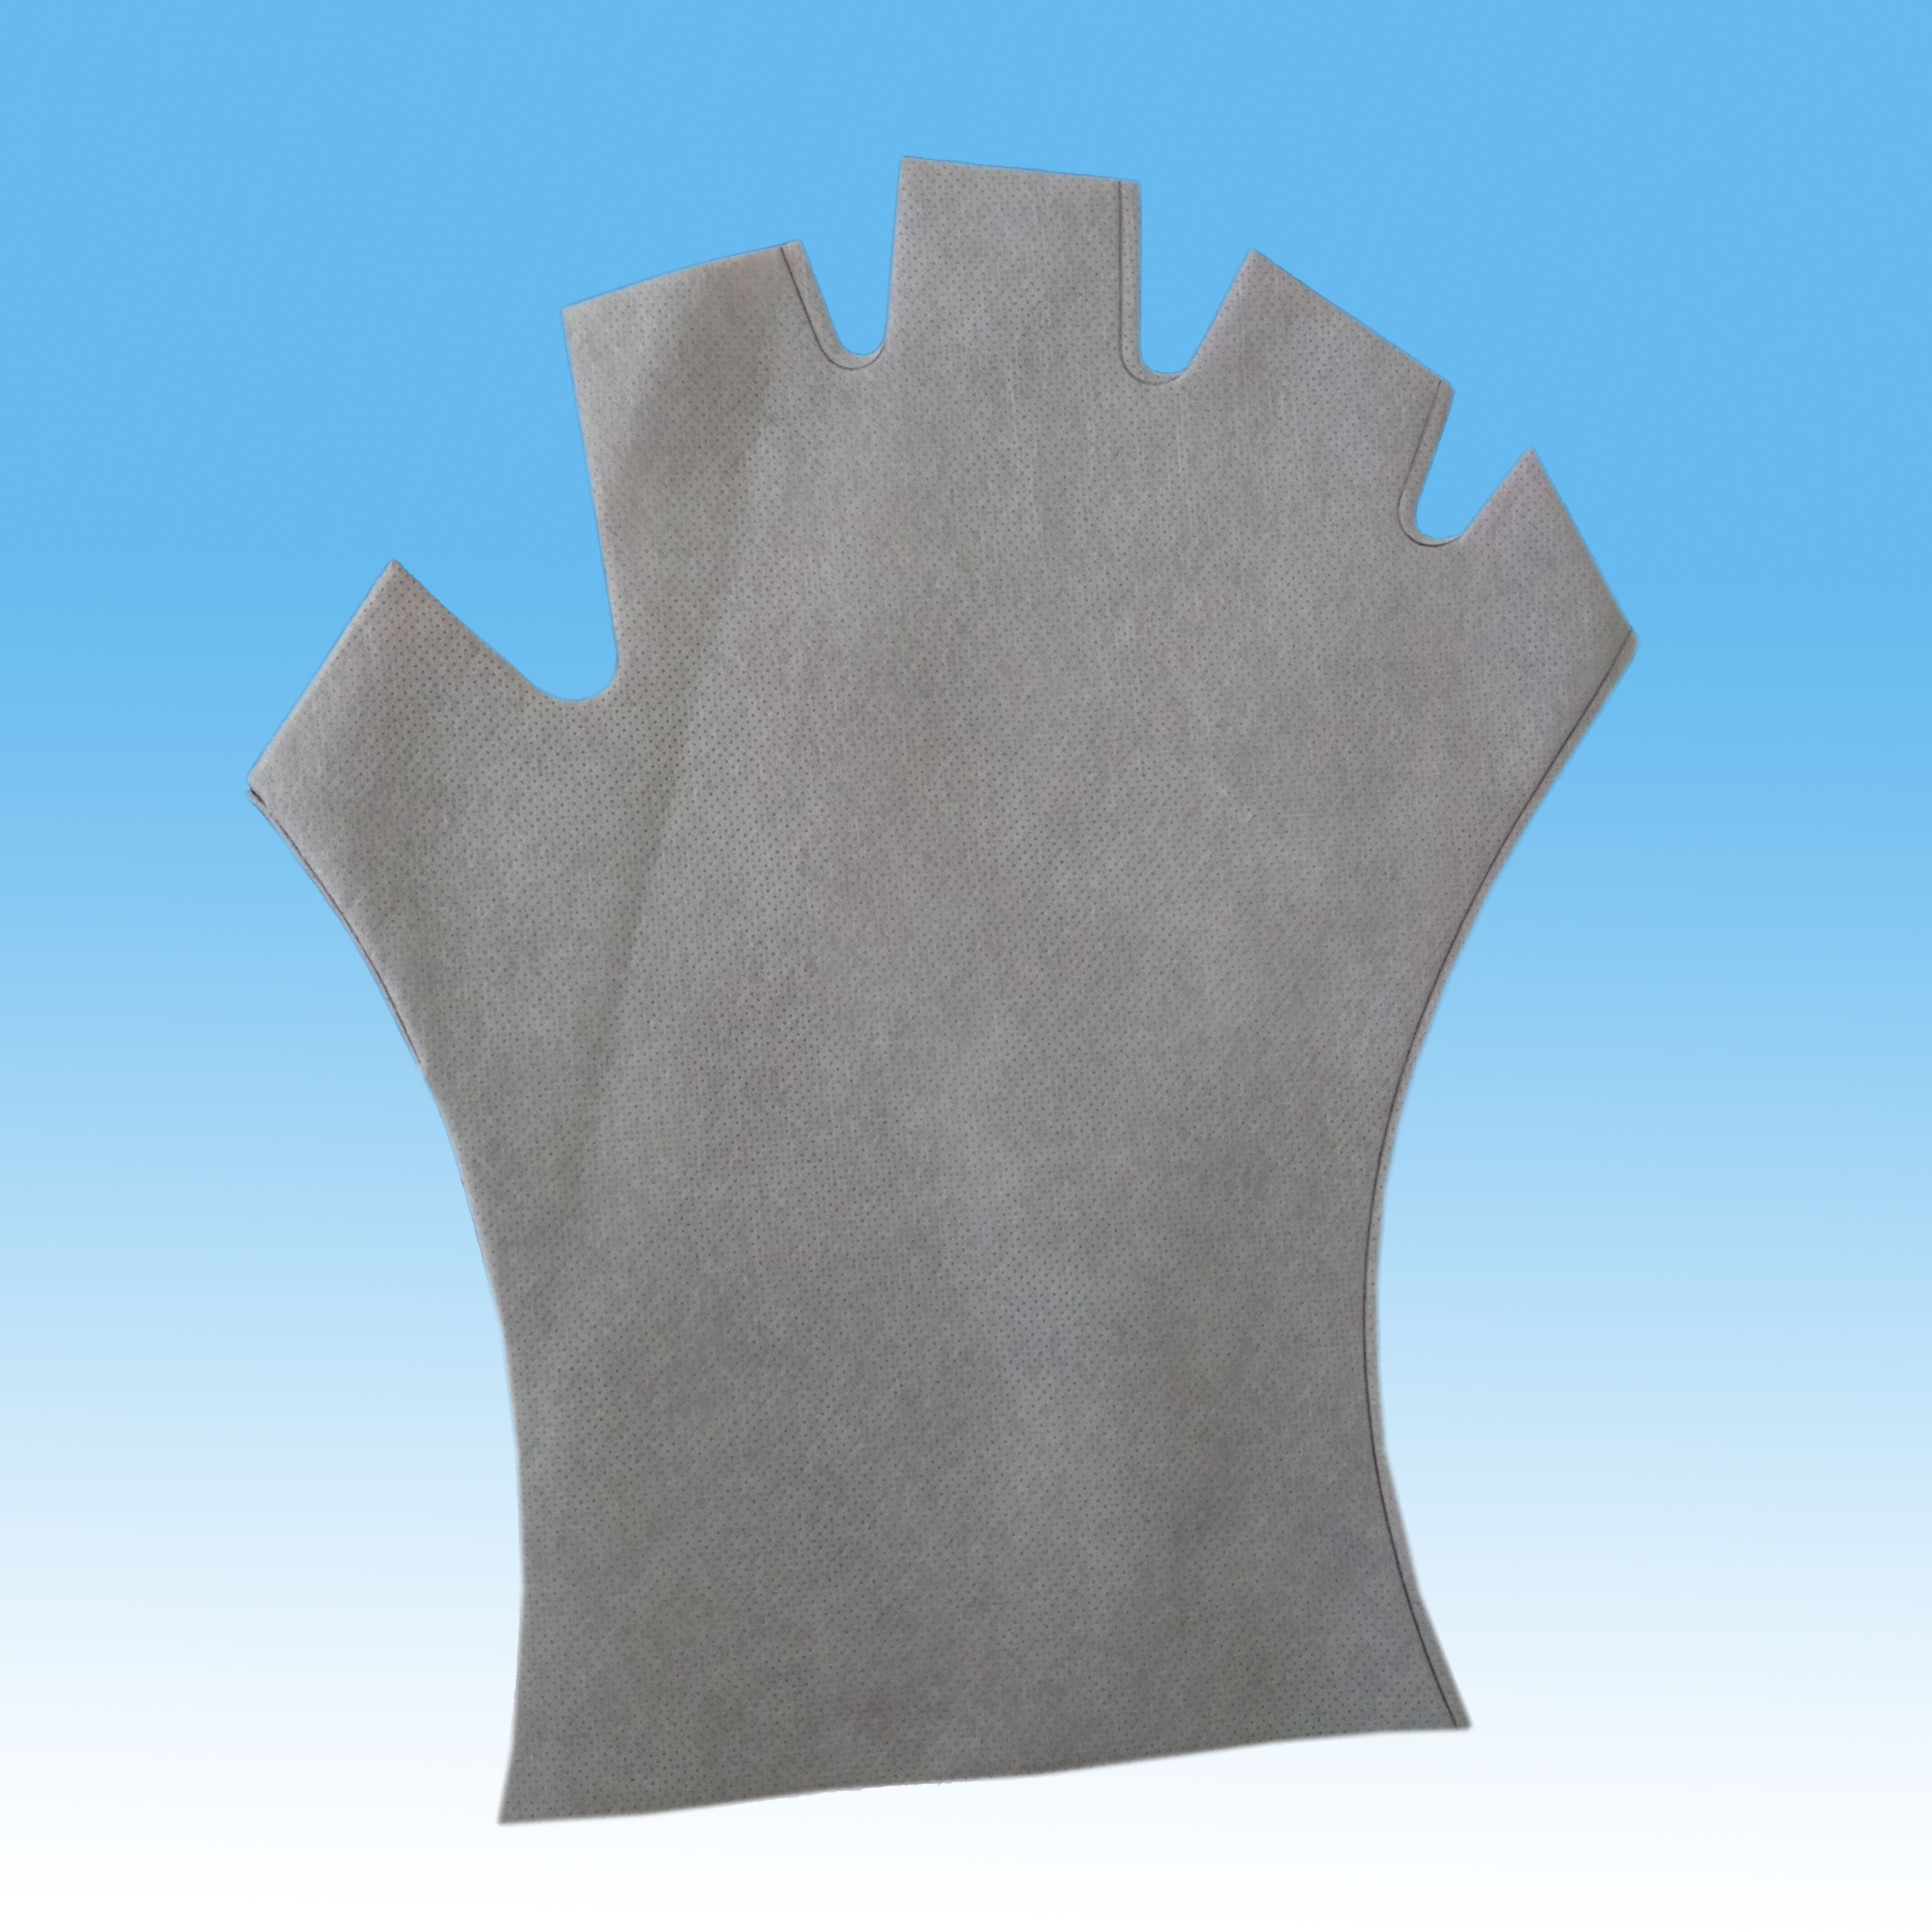 Disposable PP UV Protective Glove for Nail